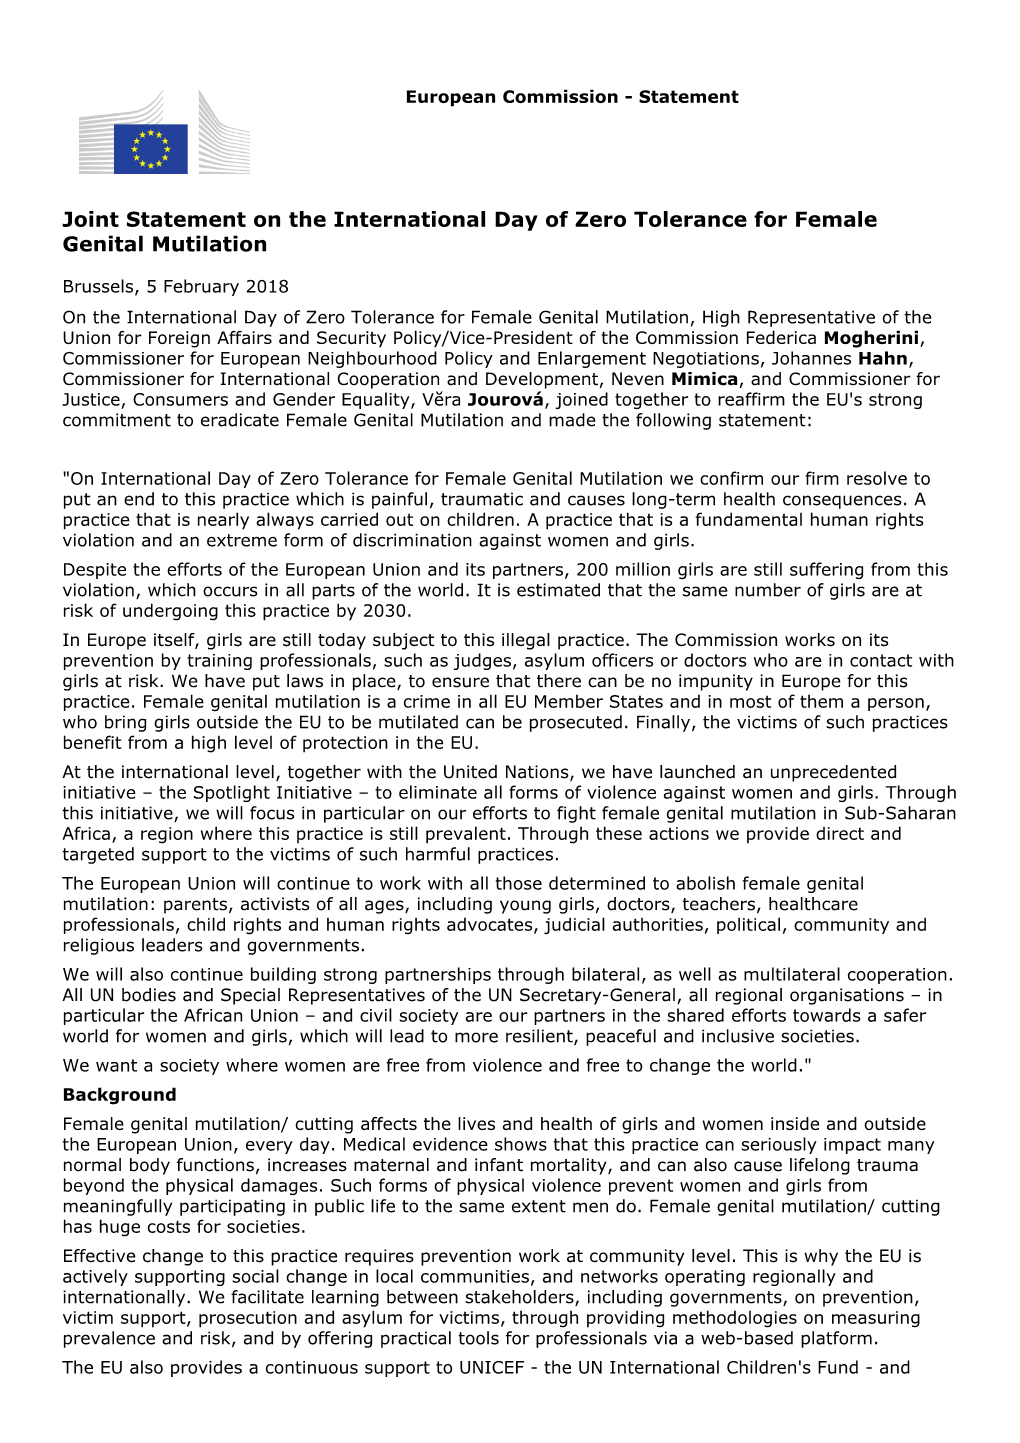 Joint Statement on the International Day of Zero Tolerance for Female Genital Mutilation